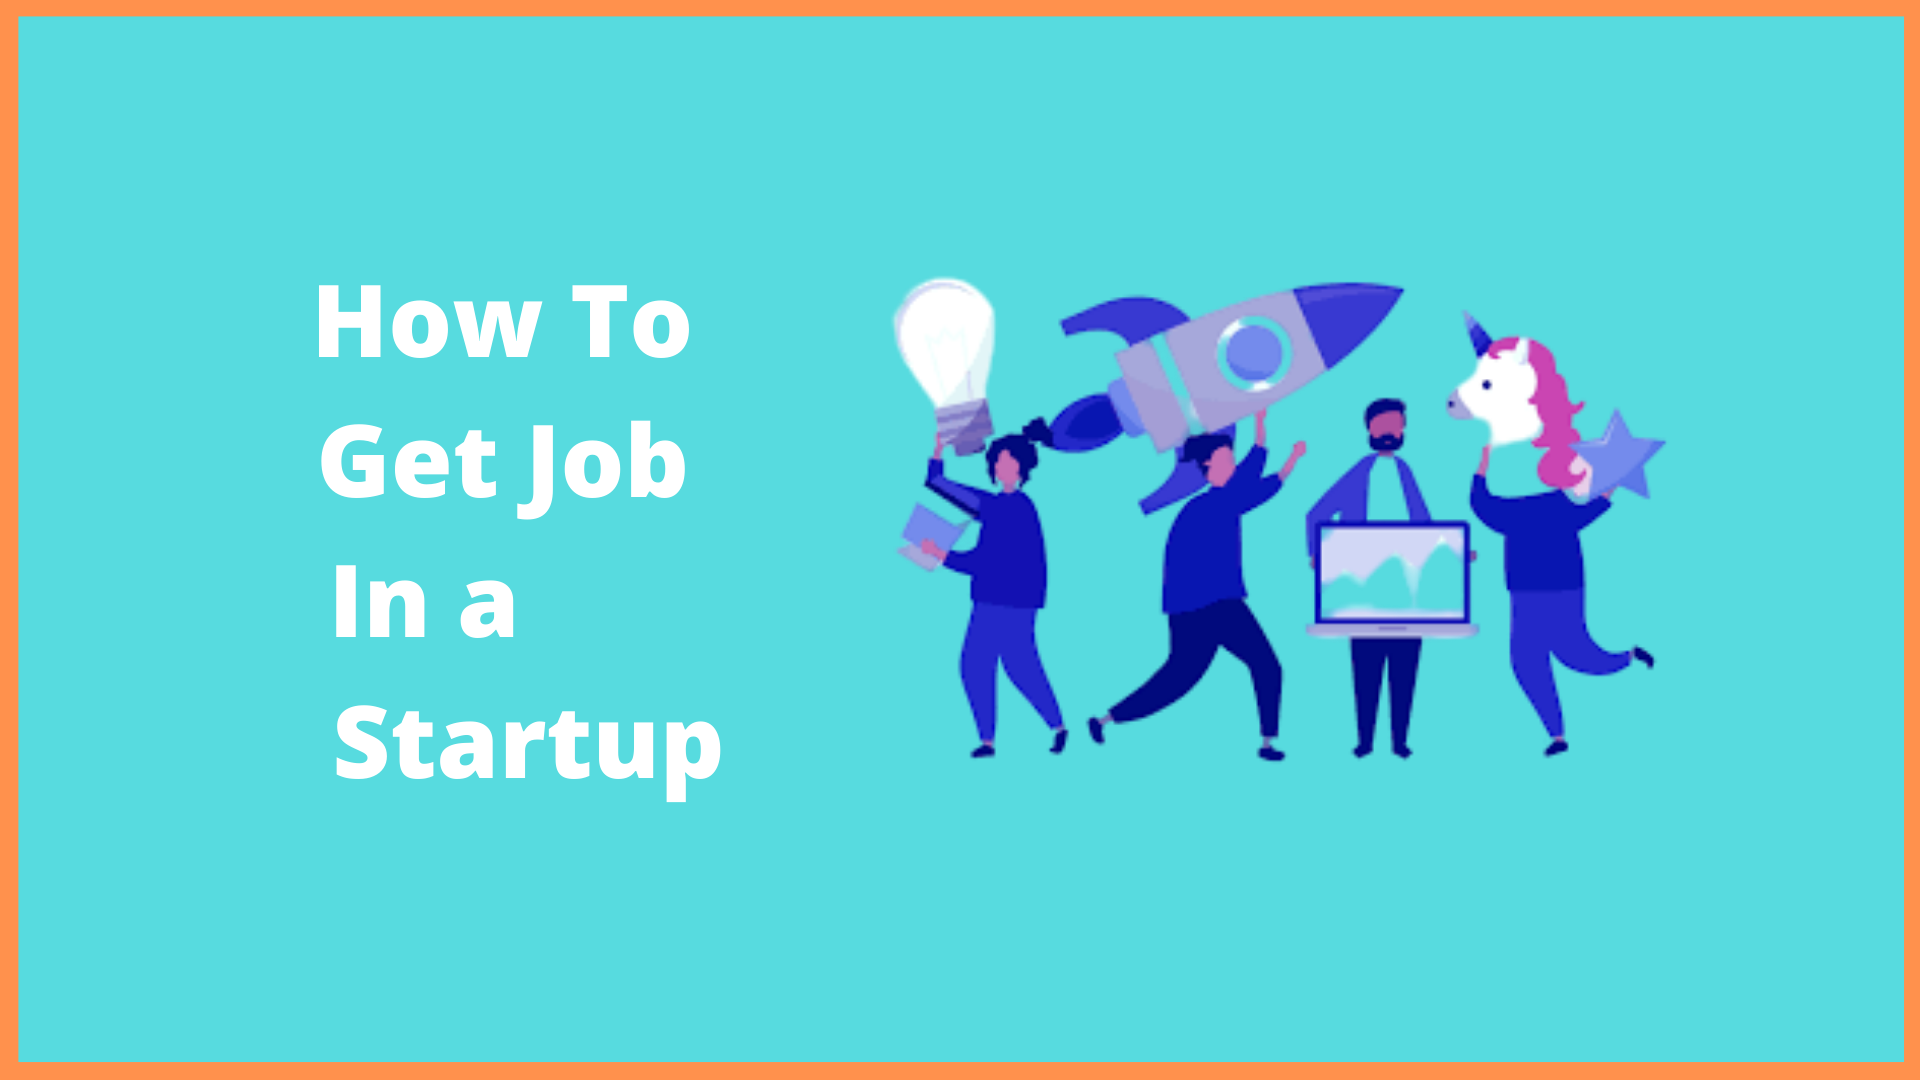 Smart Strategies To Get Job In a Startup Company